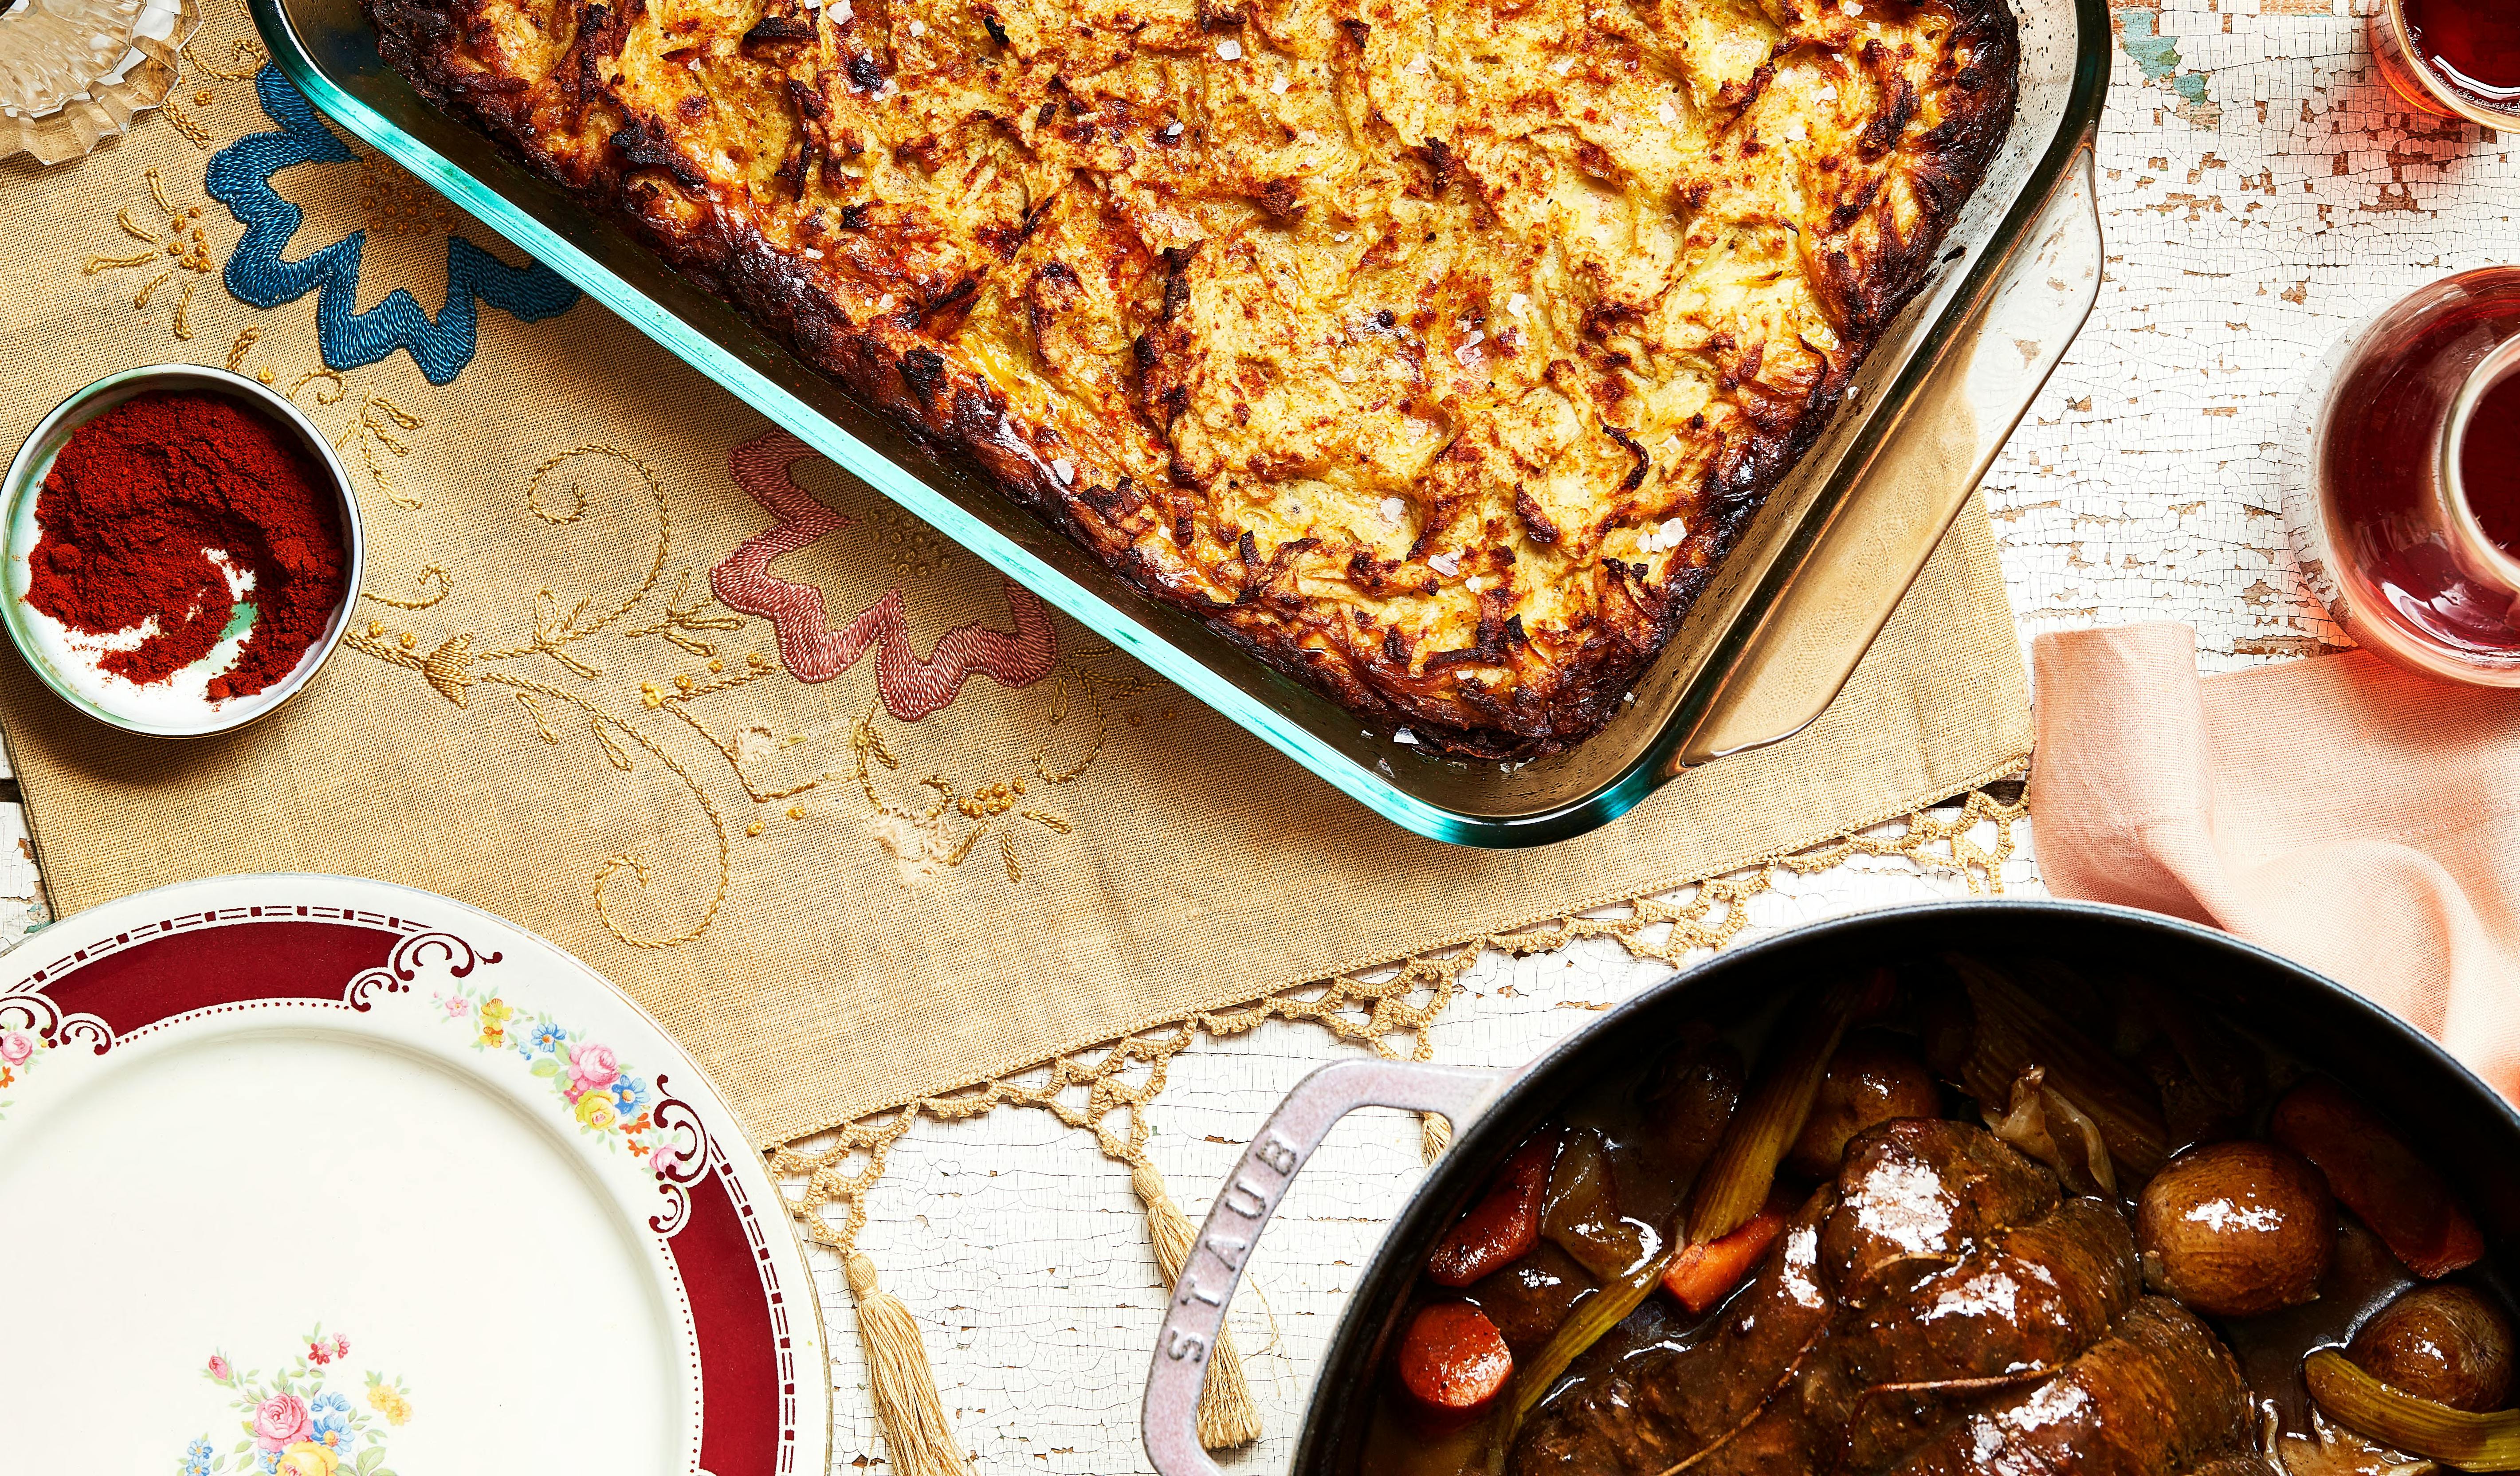 Potato kugel with paprika and red wine-braised chuck roast.